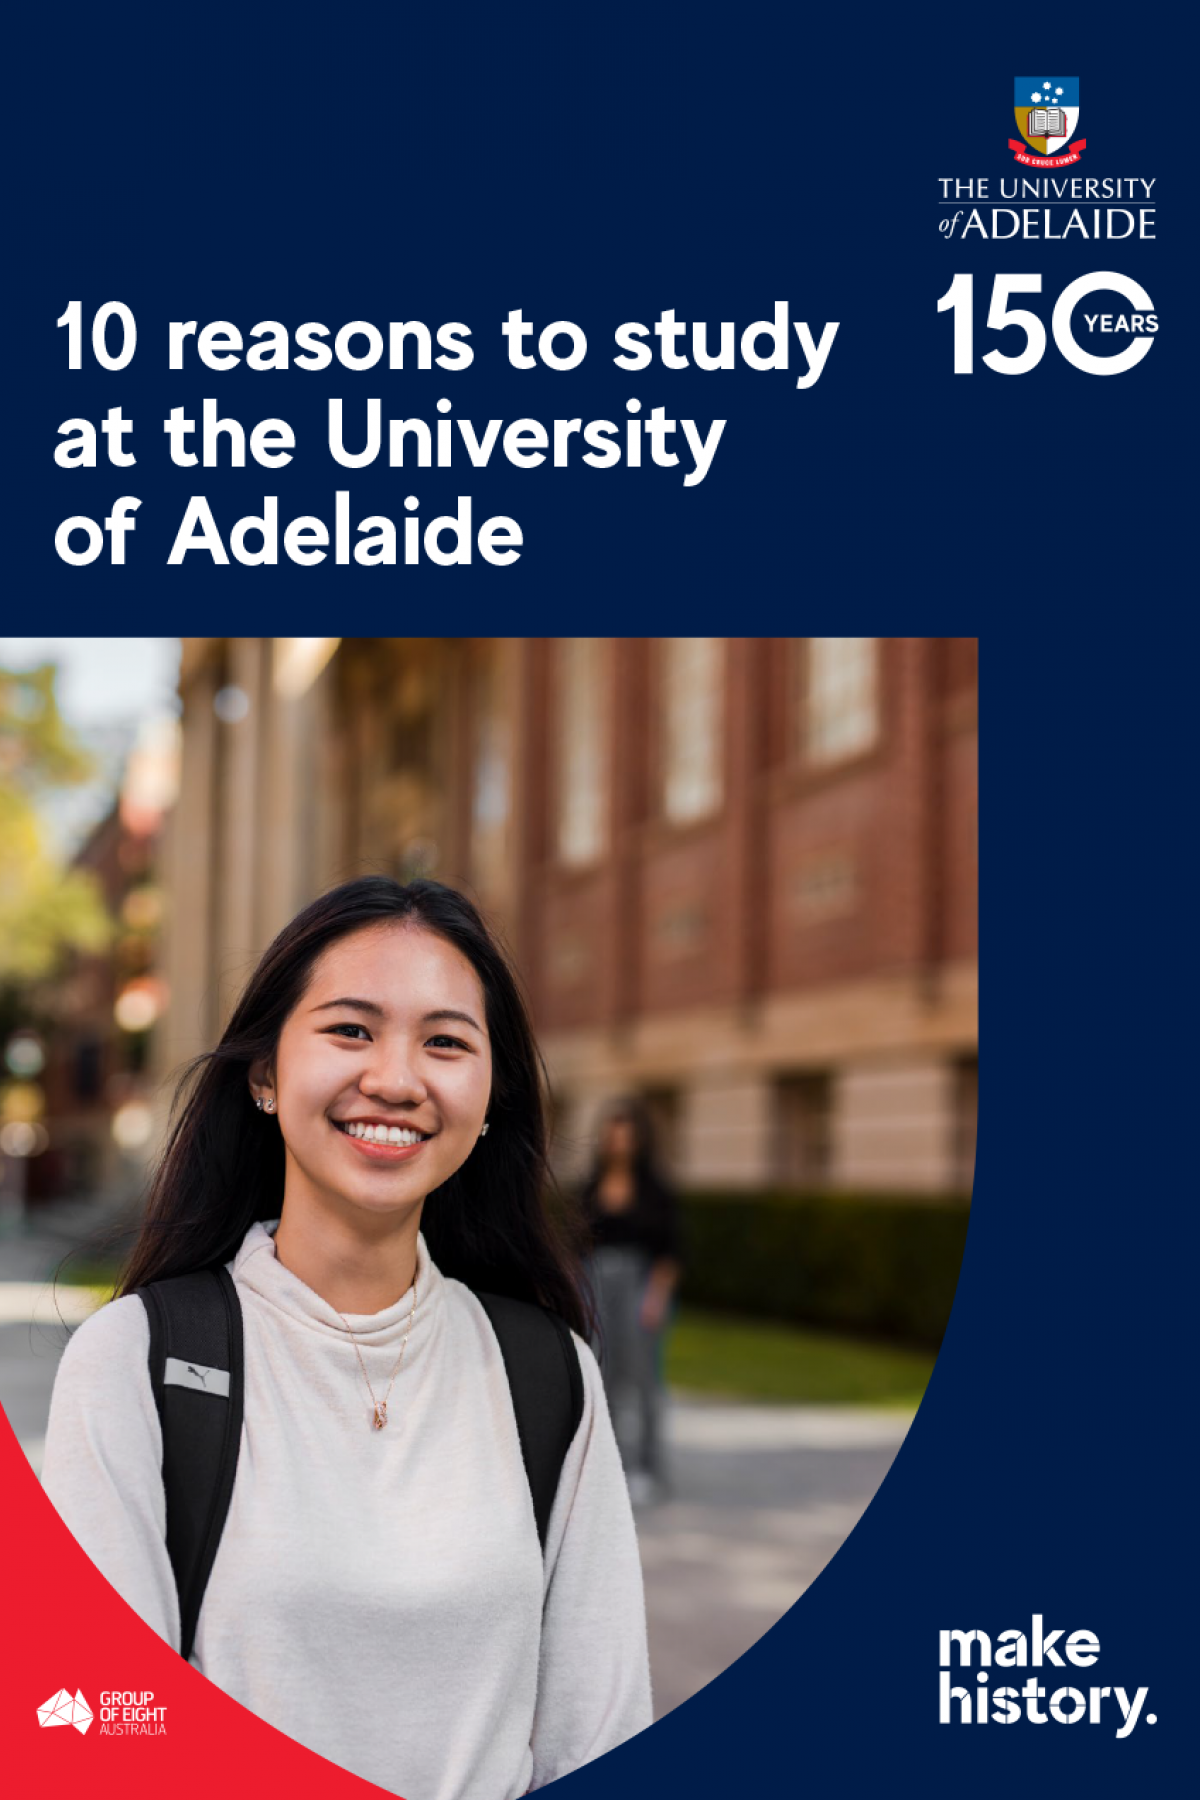 10 reasons to study at the University of Adelaide flyer